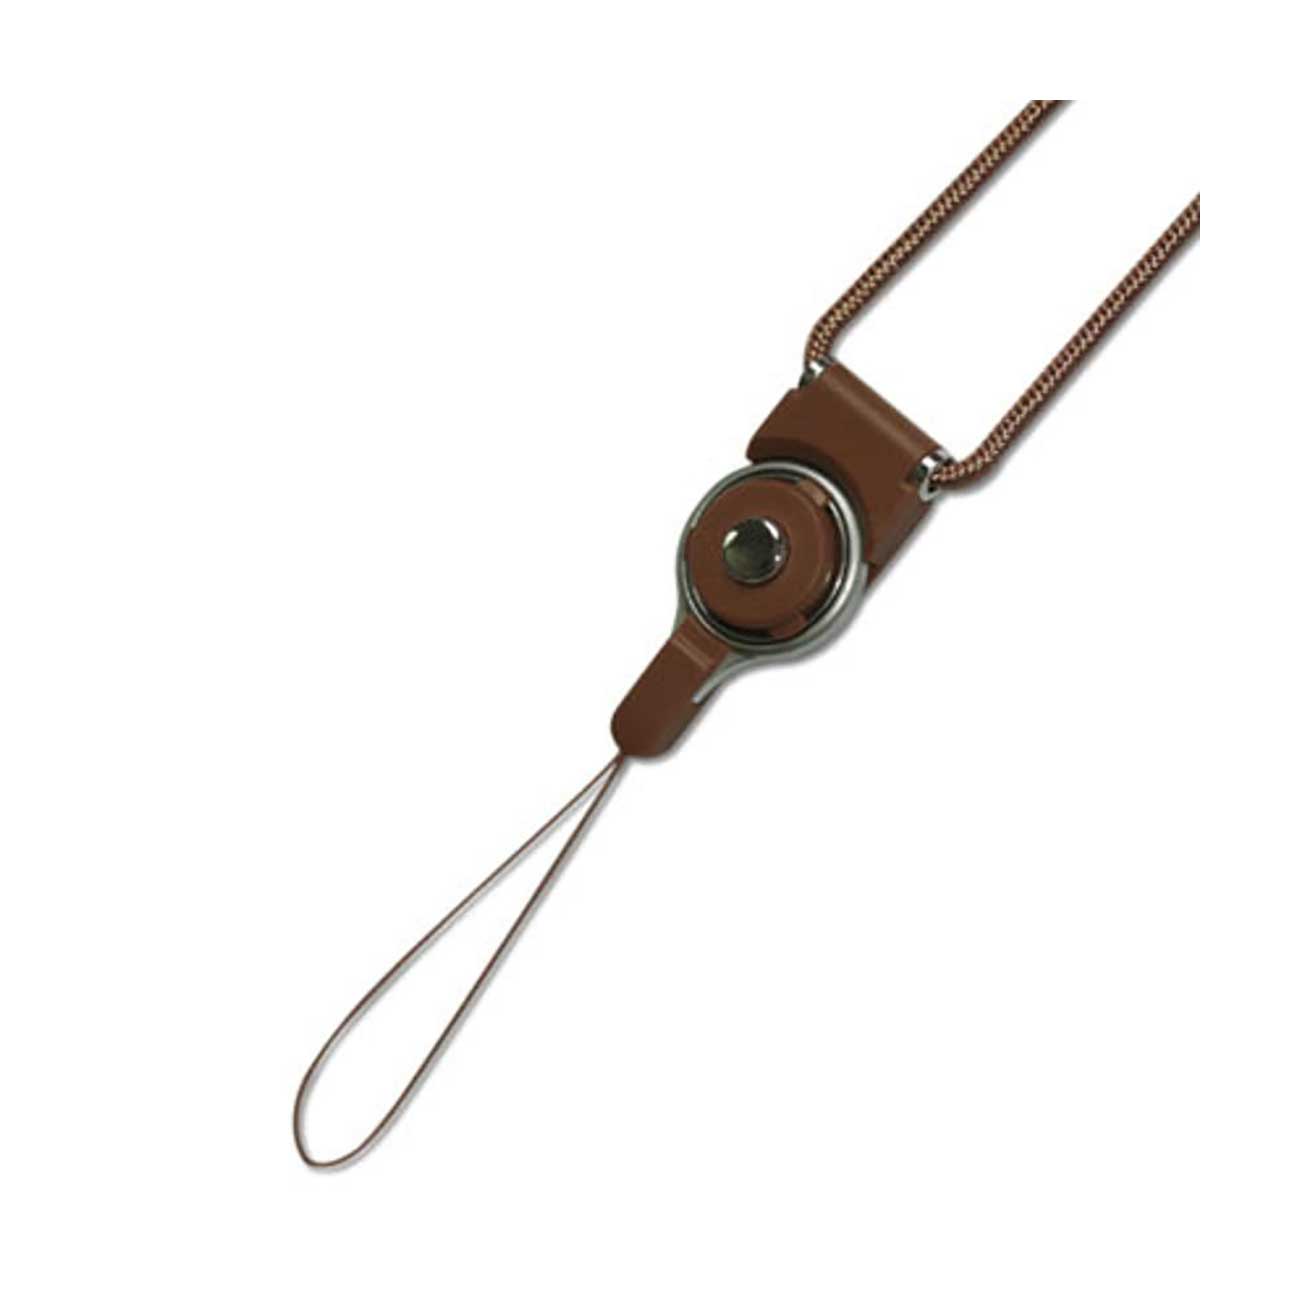 LONG LANYARD STRAP WITH CLIP IN BROWN